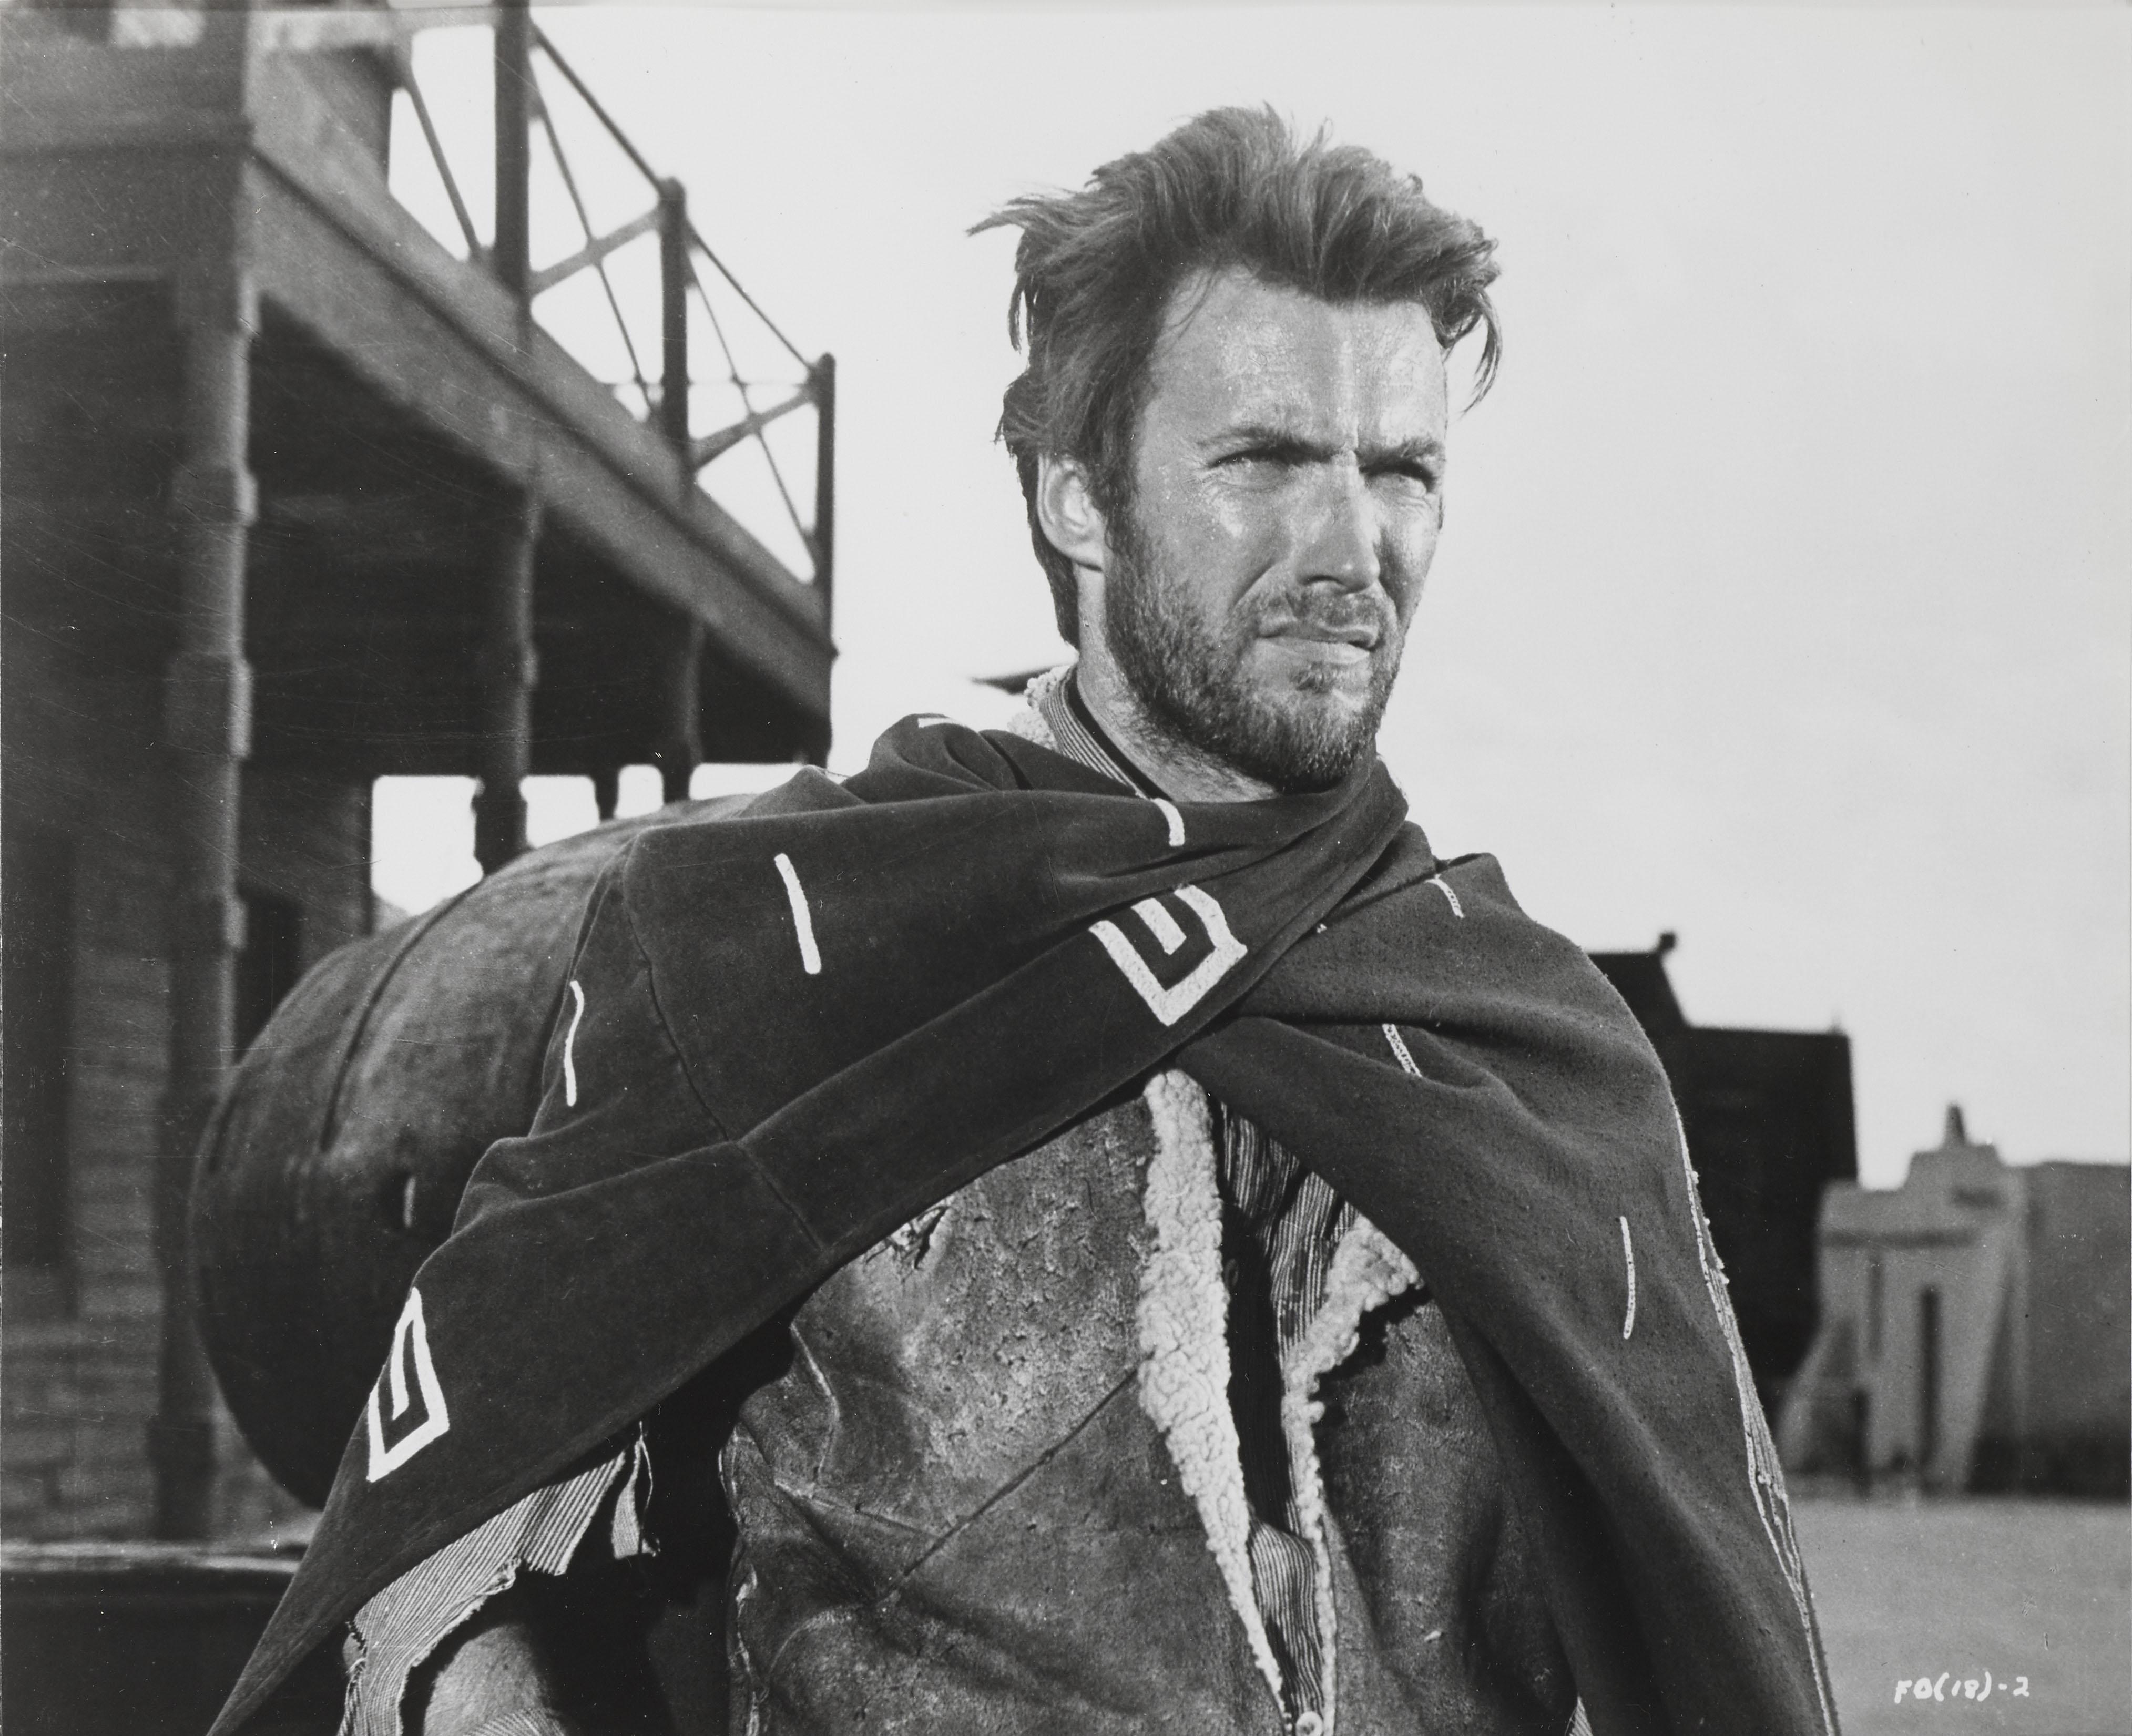 Original US photographic production still from the film A Fistful of Dollars 1964.
This film was directed by Sergio Leone, and starred Clint Eastwood in the first of his Dollars trilogy. This piece is framed in a Sapele wood
frame with acid free